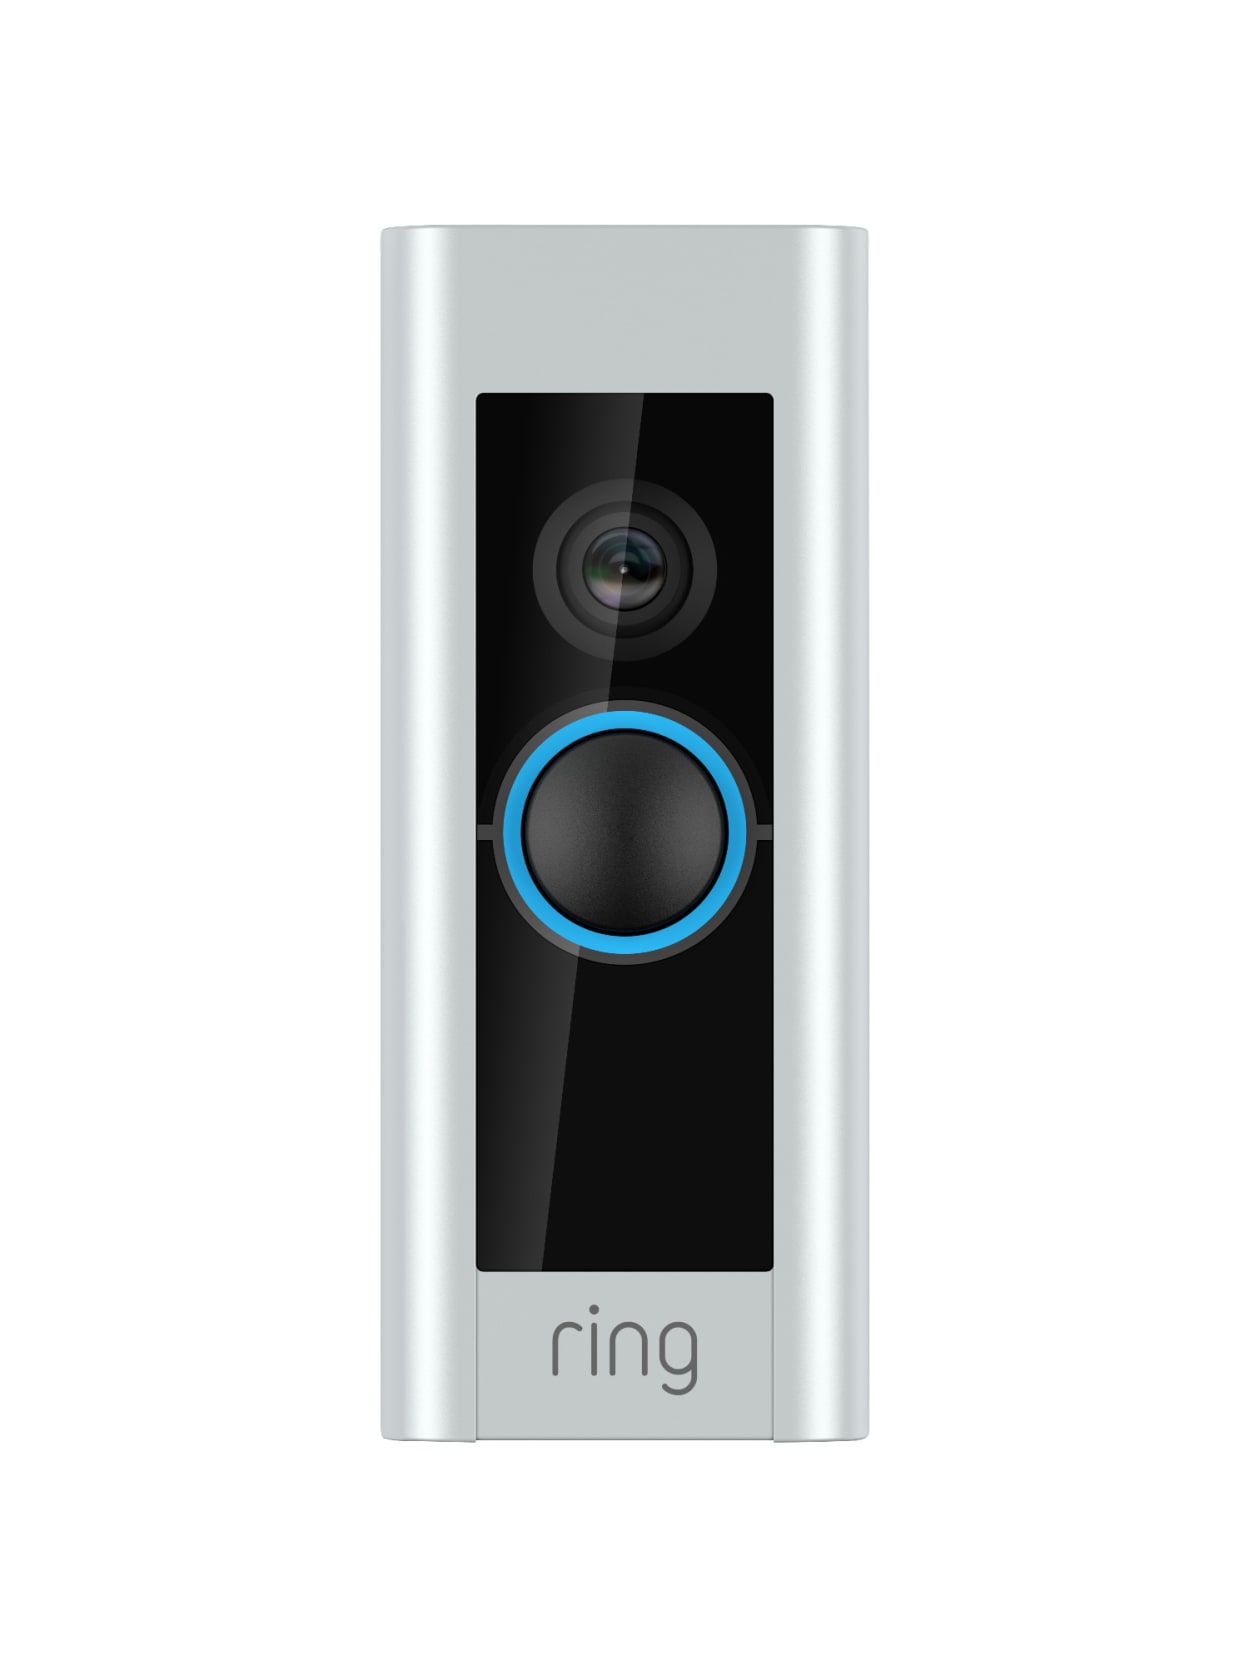 ring doorbell record to hard drive